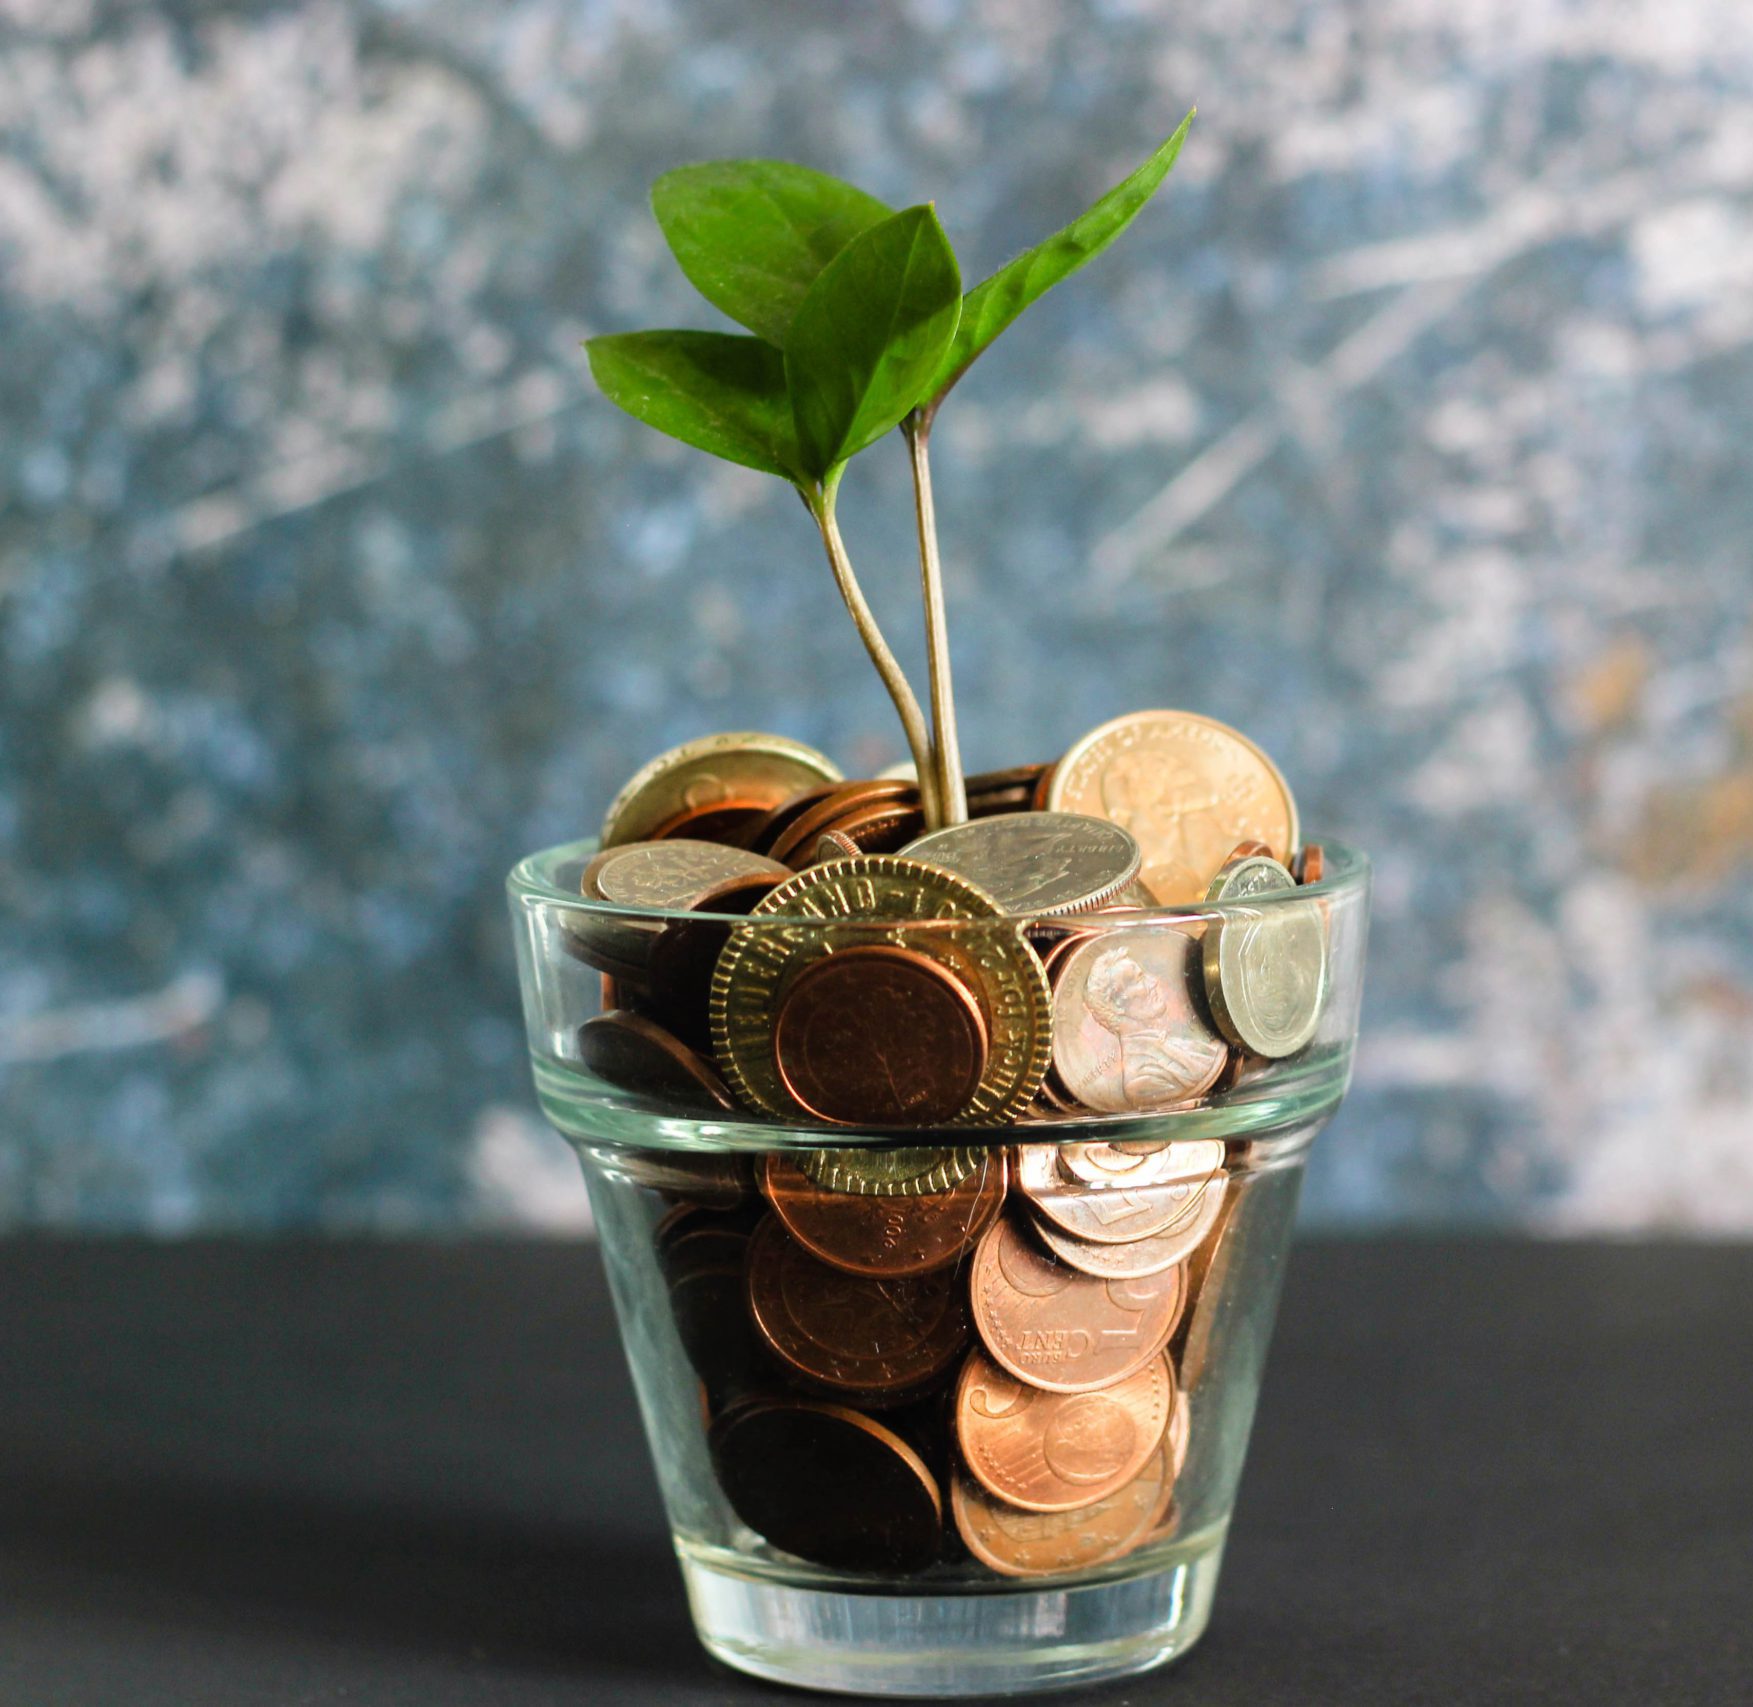 Coins-in-jar-with-plant-scaled-e1612889349507